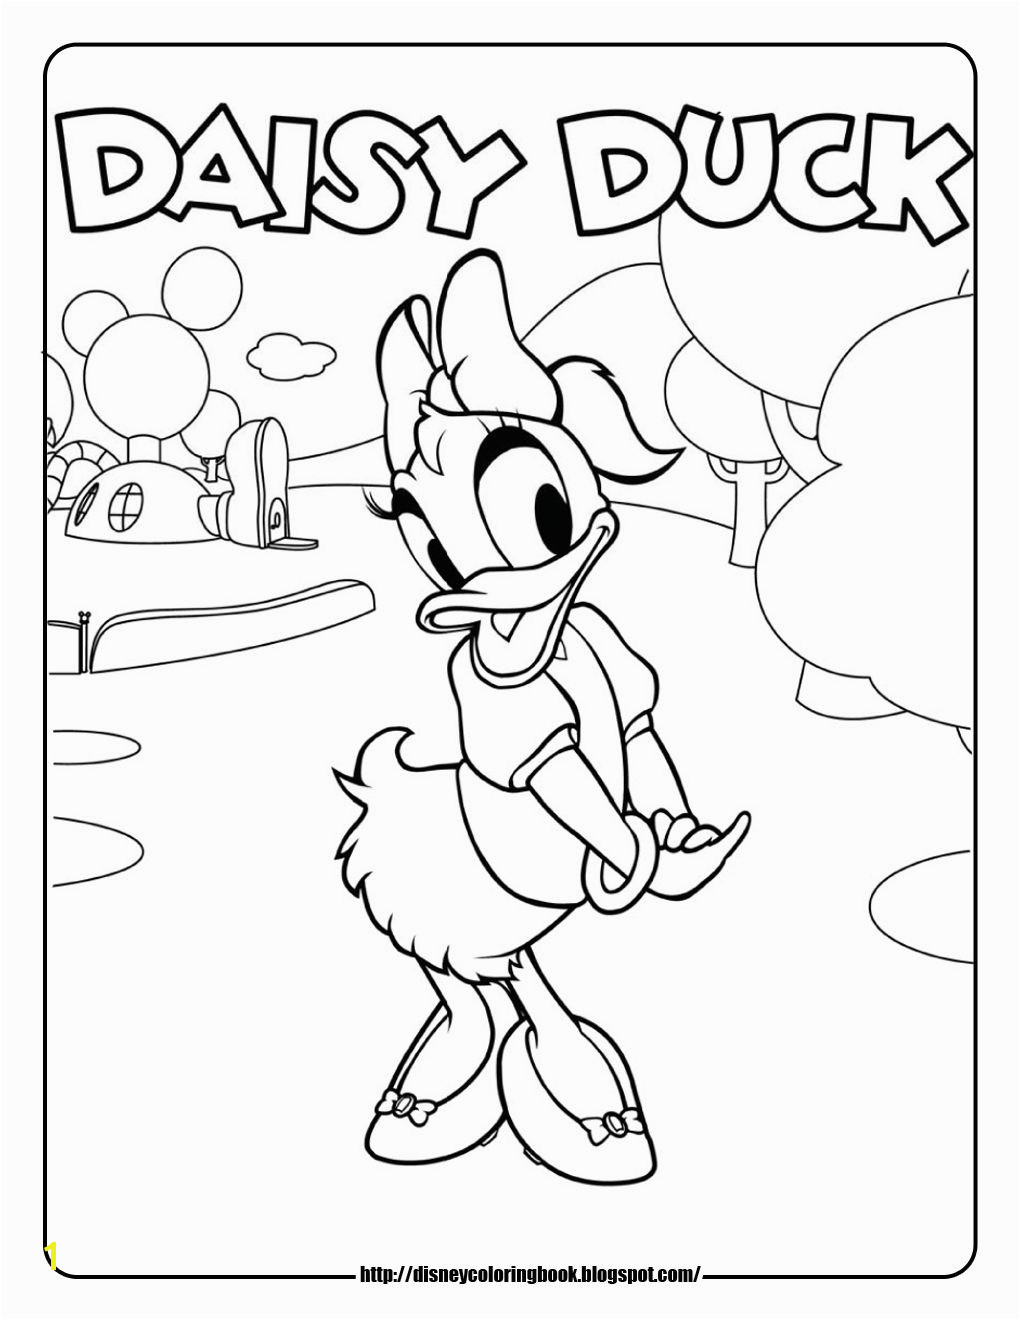 Disney Coloring Pages and Sheets for Kids Mickey Mouse Clubhouse 1 Free Disney Coloring Sheets